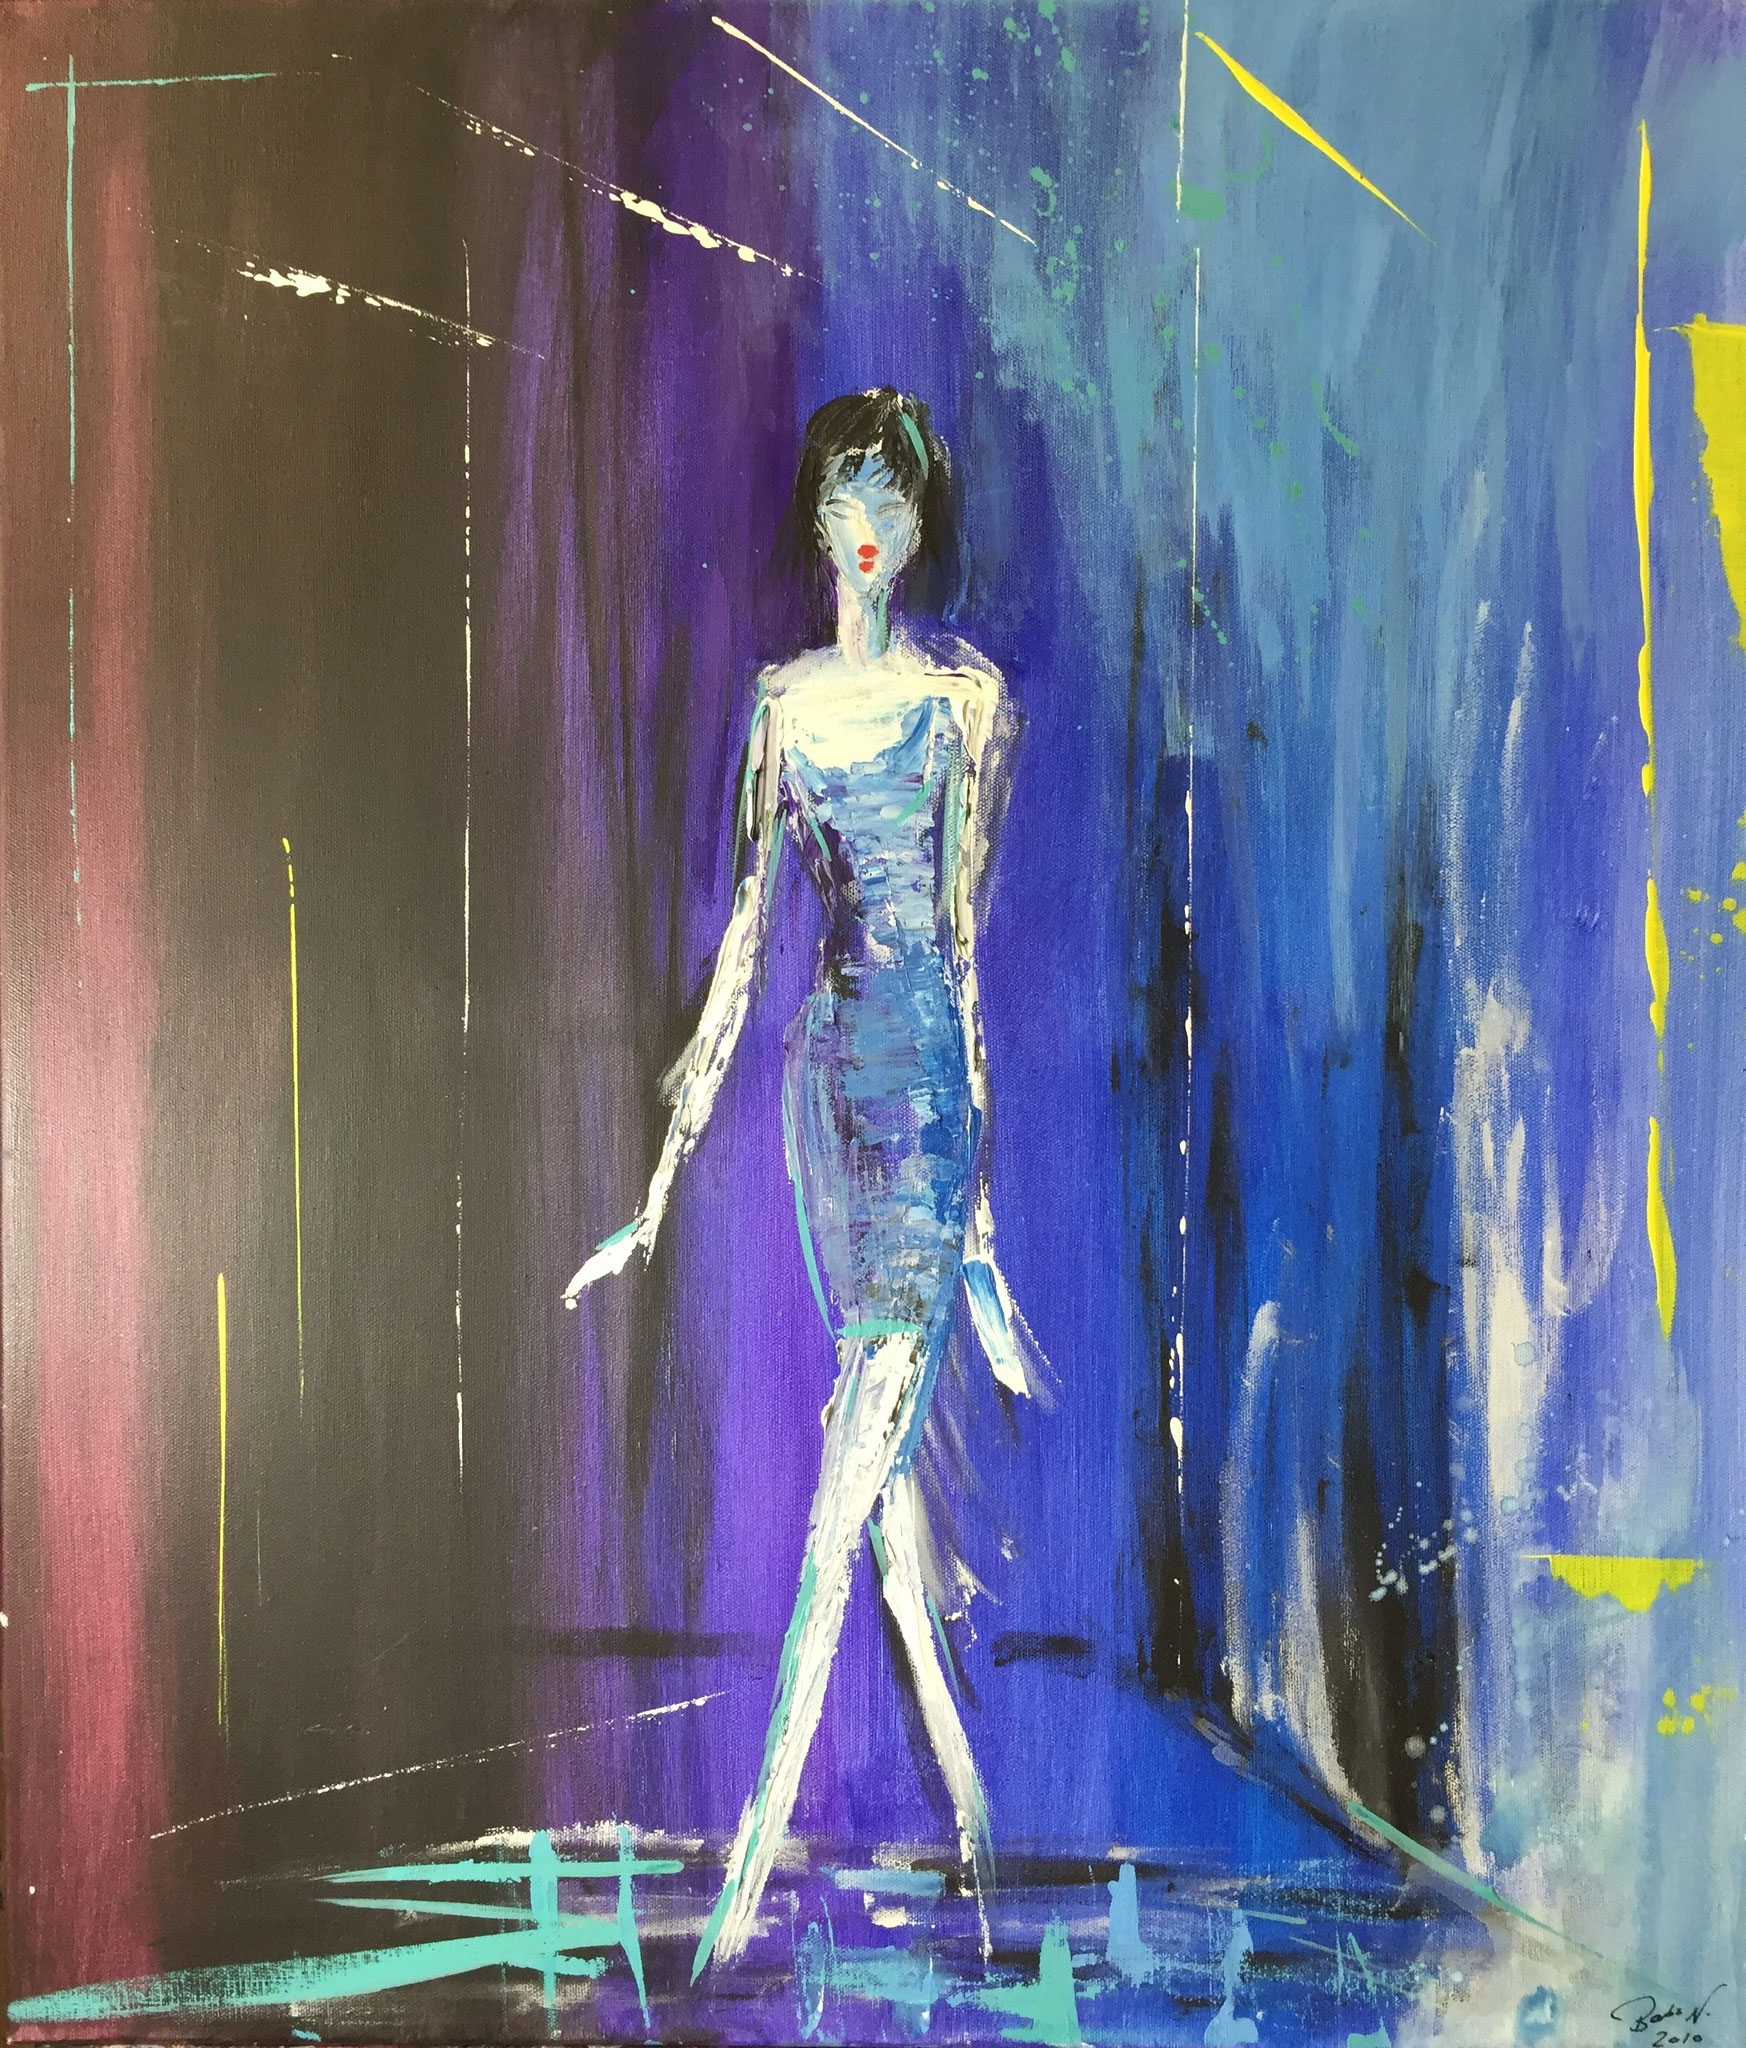 blue lady - 70x60 cm - present to my sister-in-law